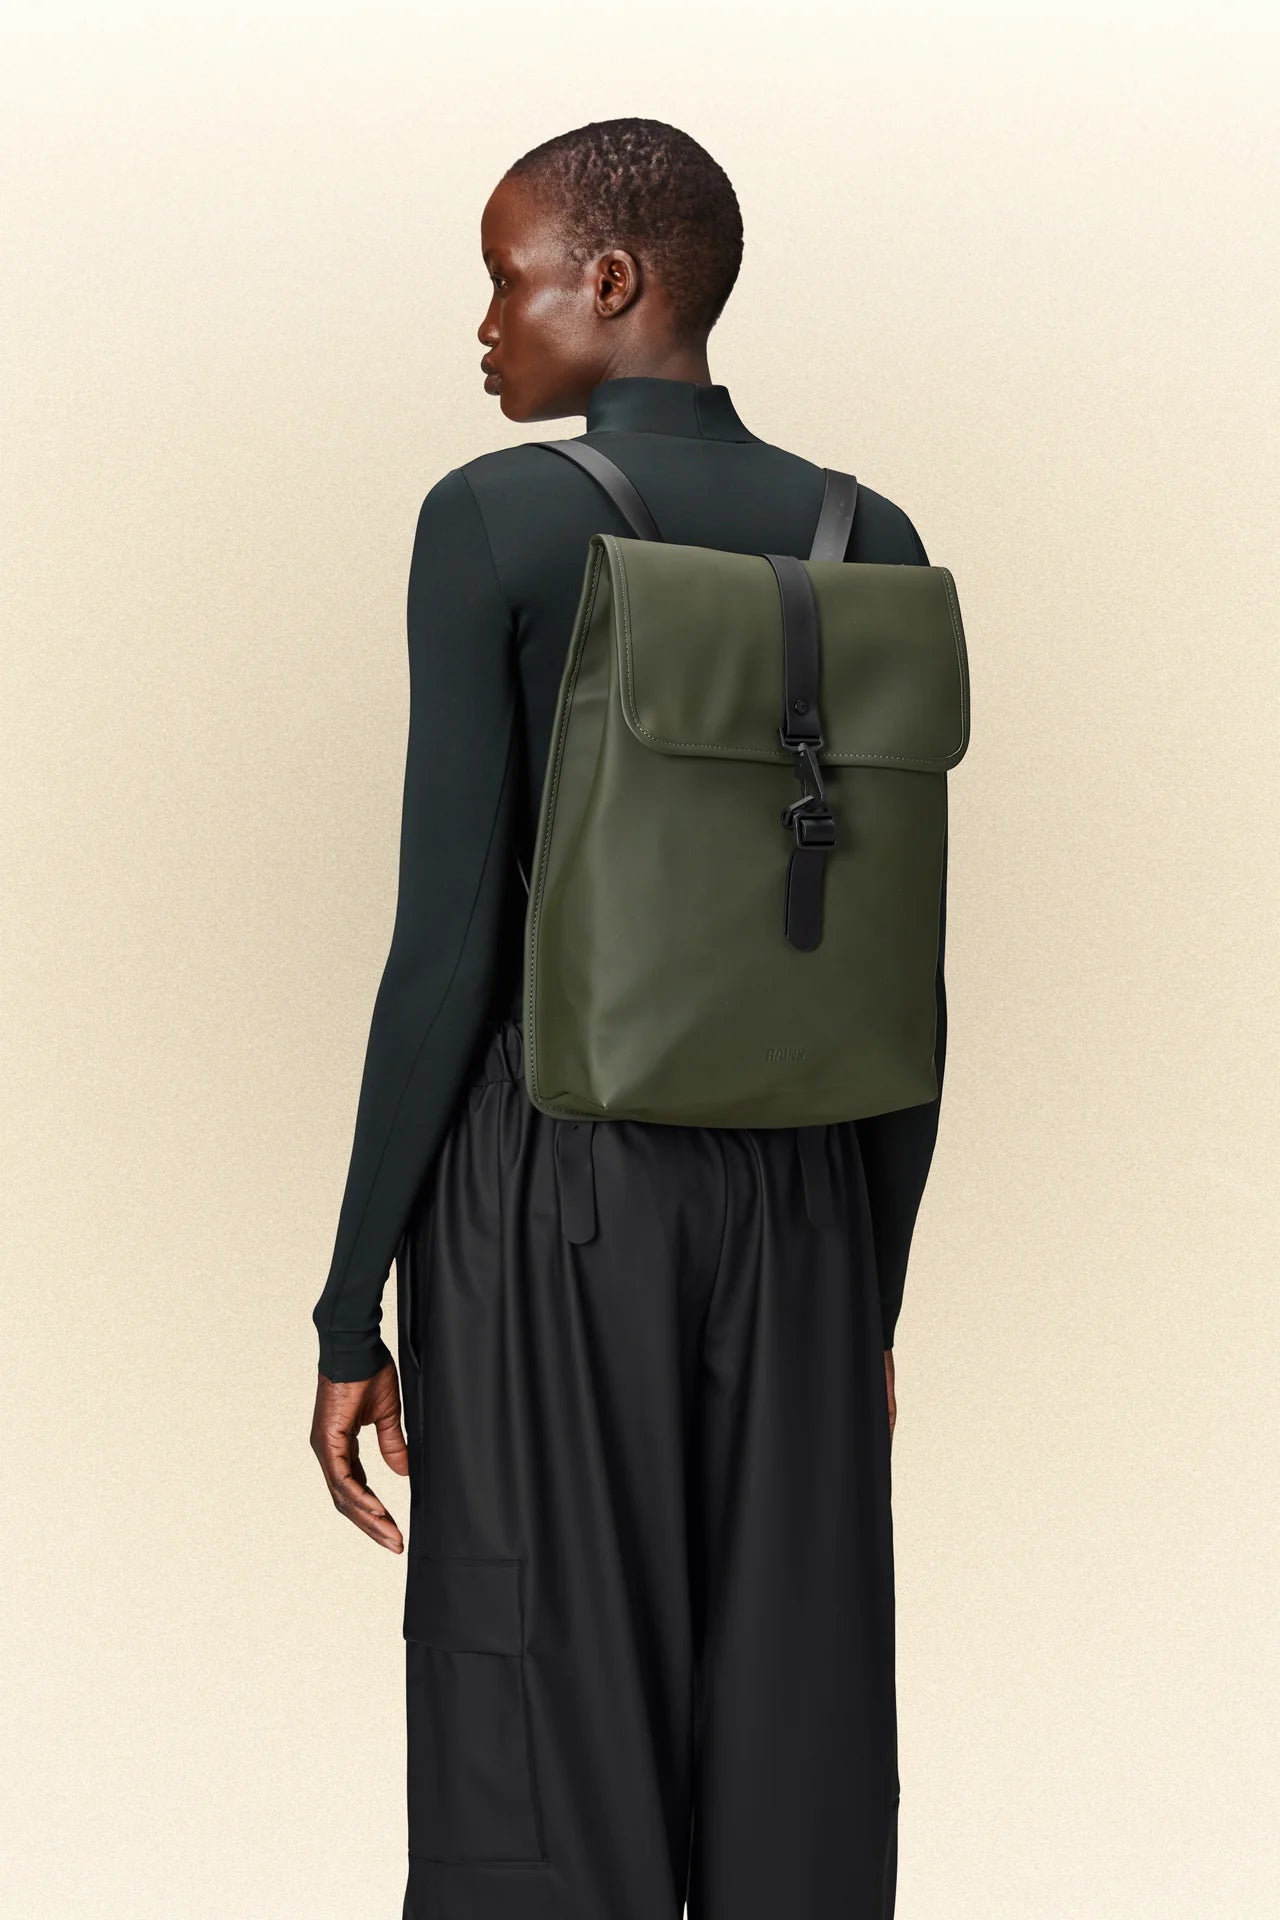 The back view of a woman wearing black pants and a green Rains rucksack with a laptop pocket.